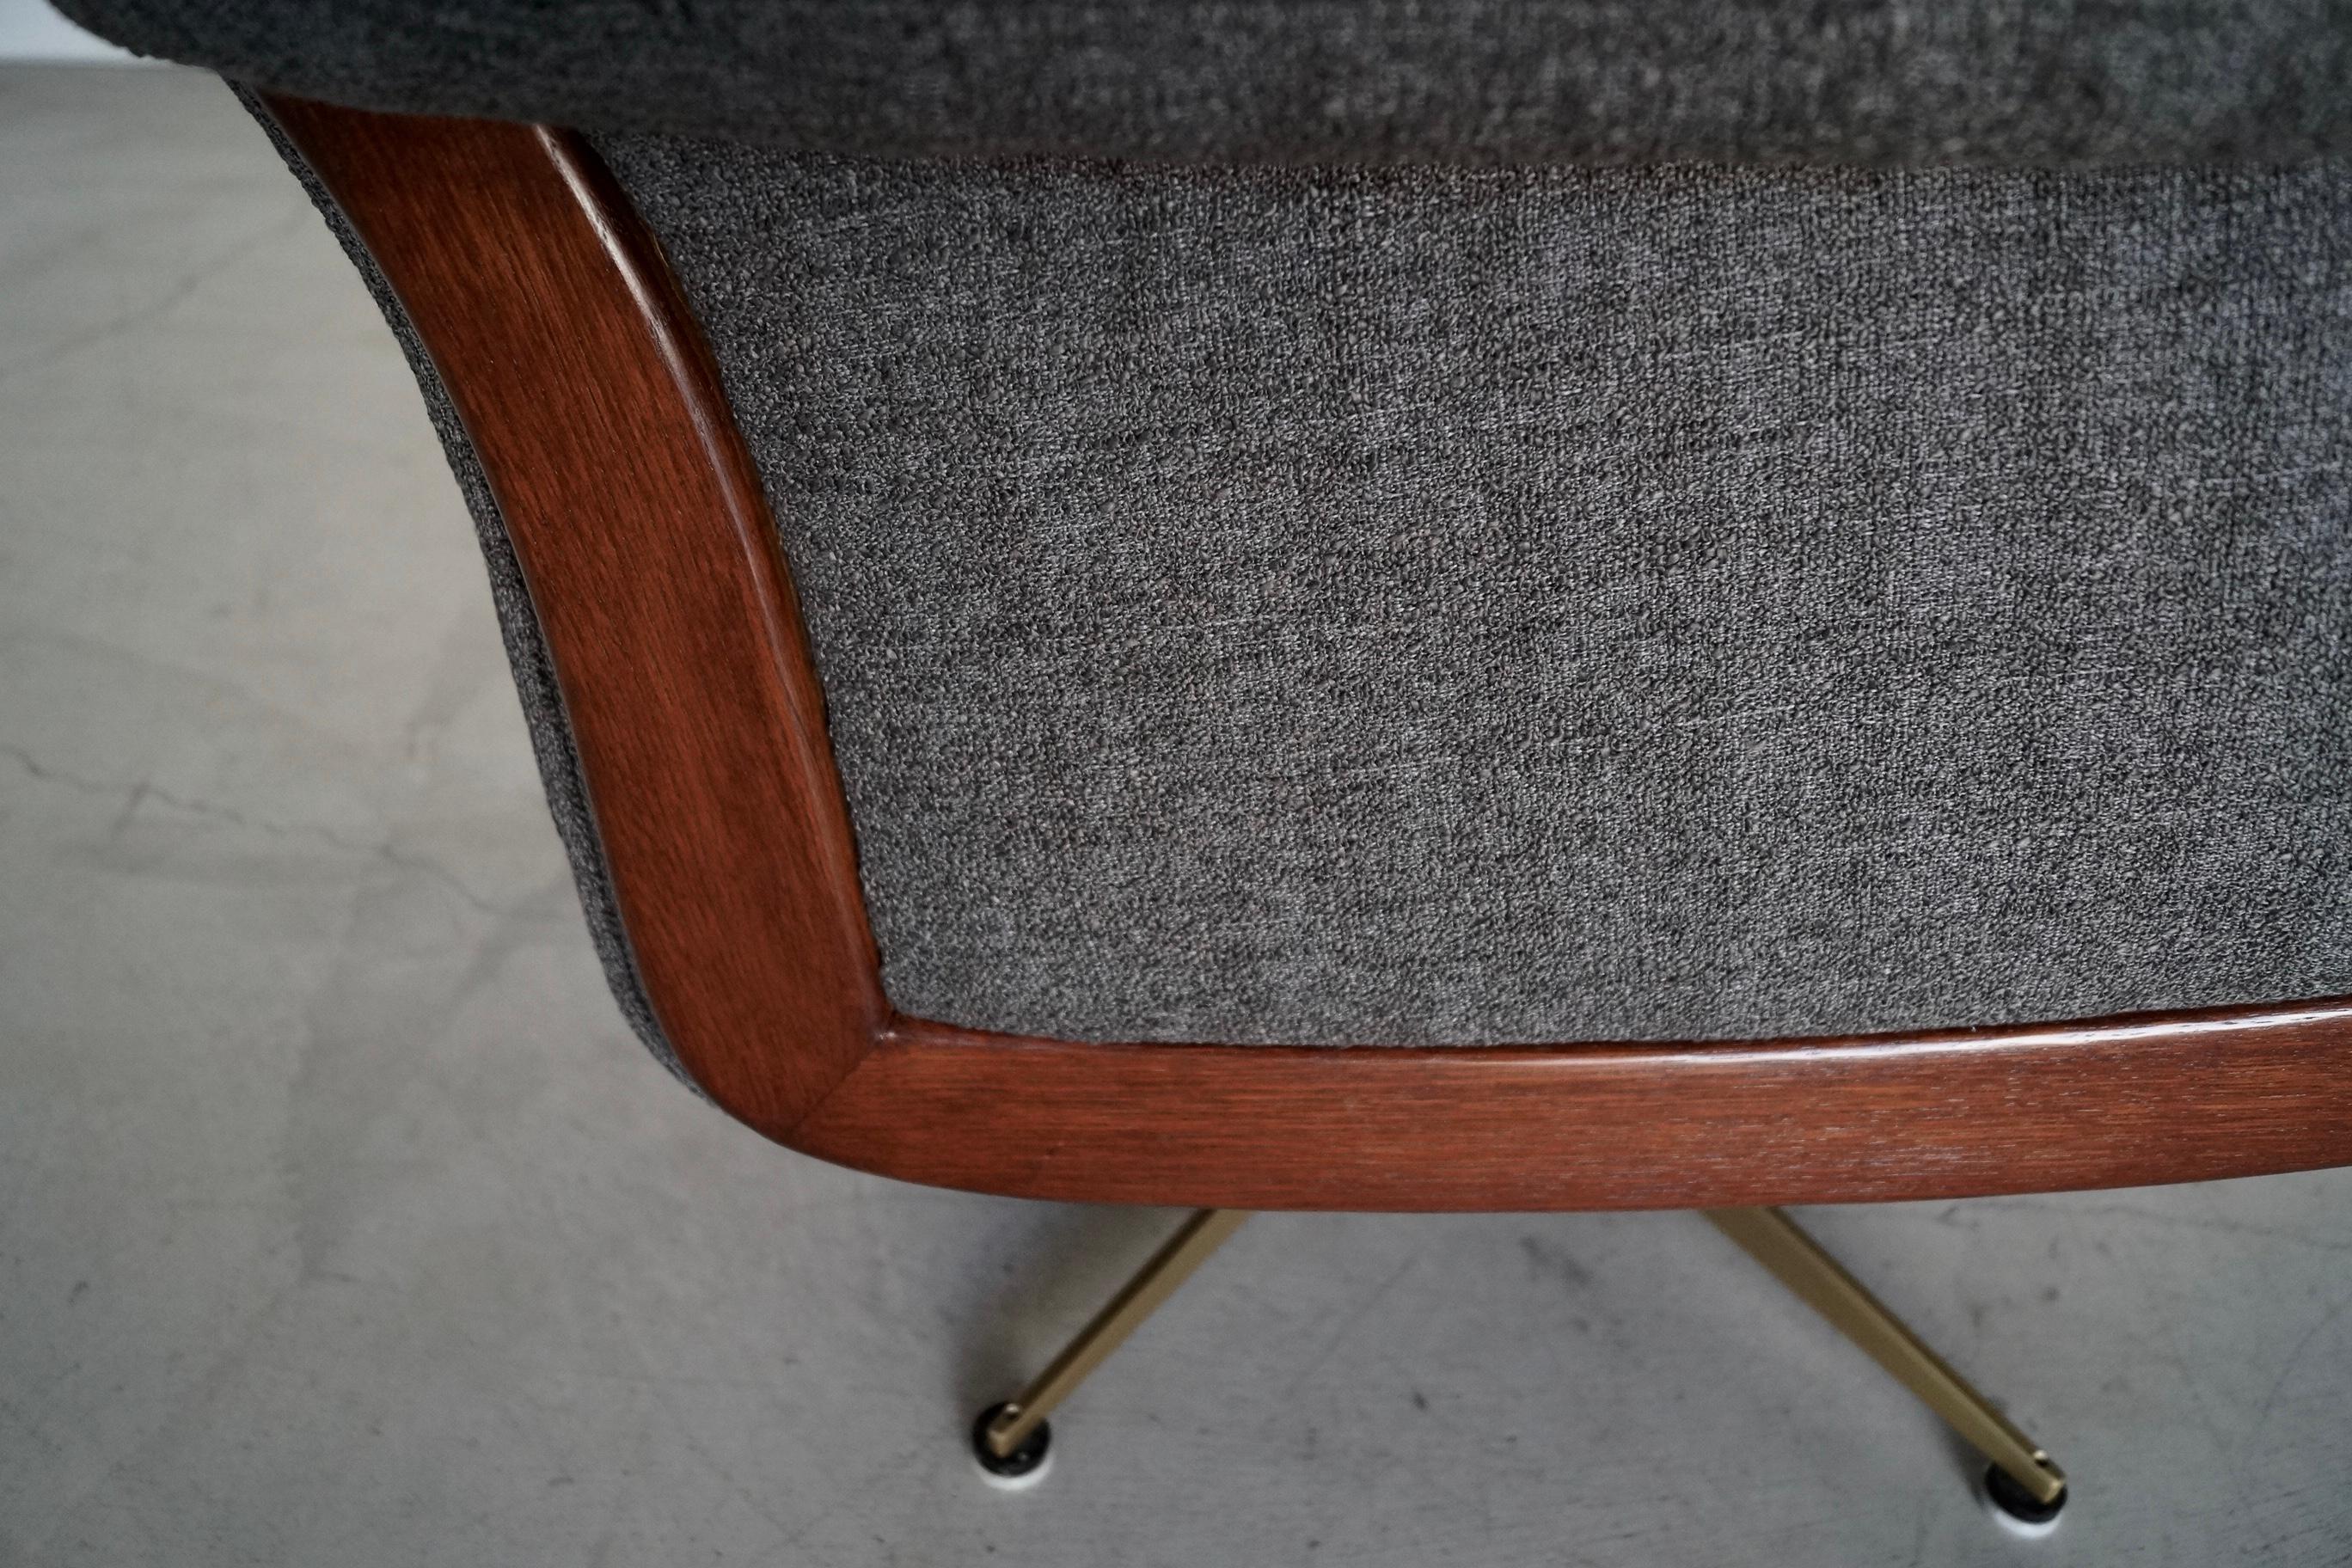 1970's Mid-Century Modern Swivel Lounge Chairs - a Pair For Sale 10